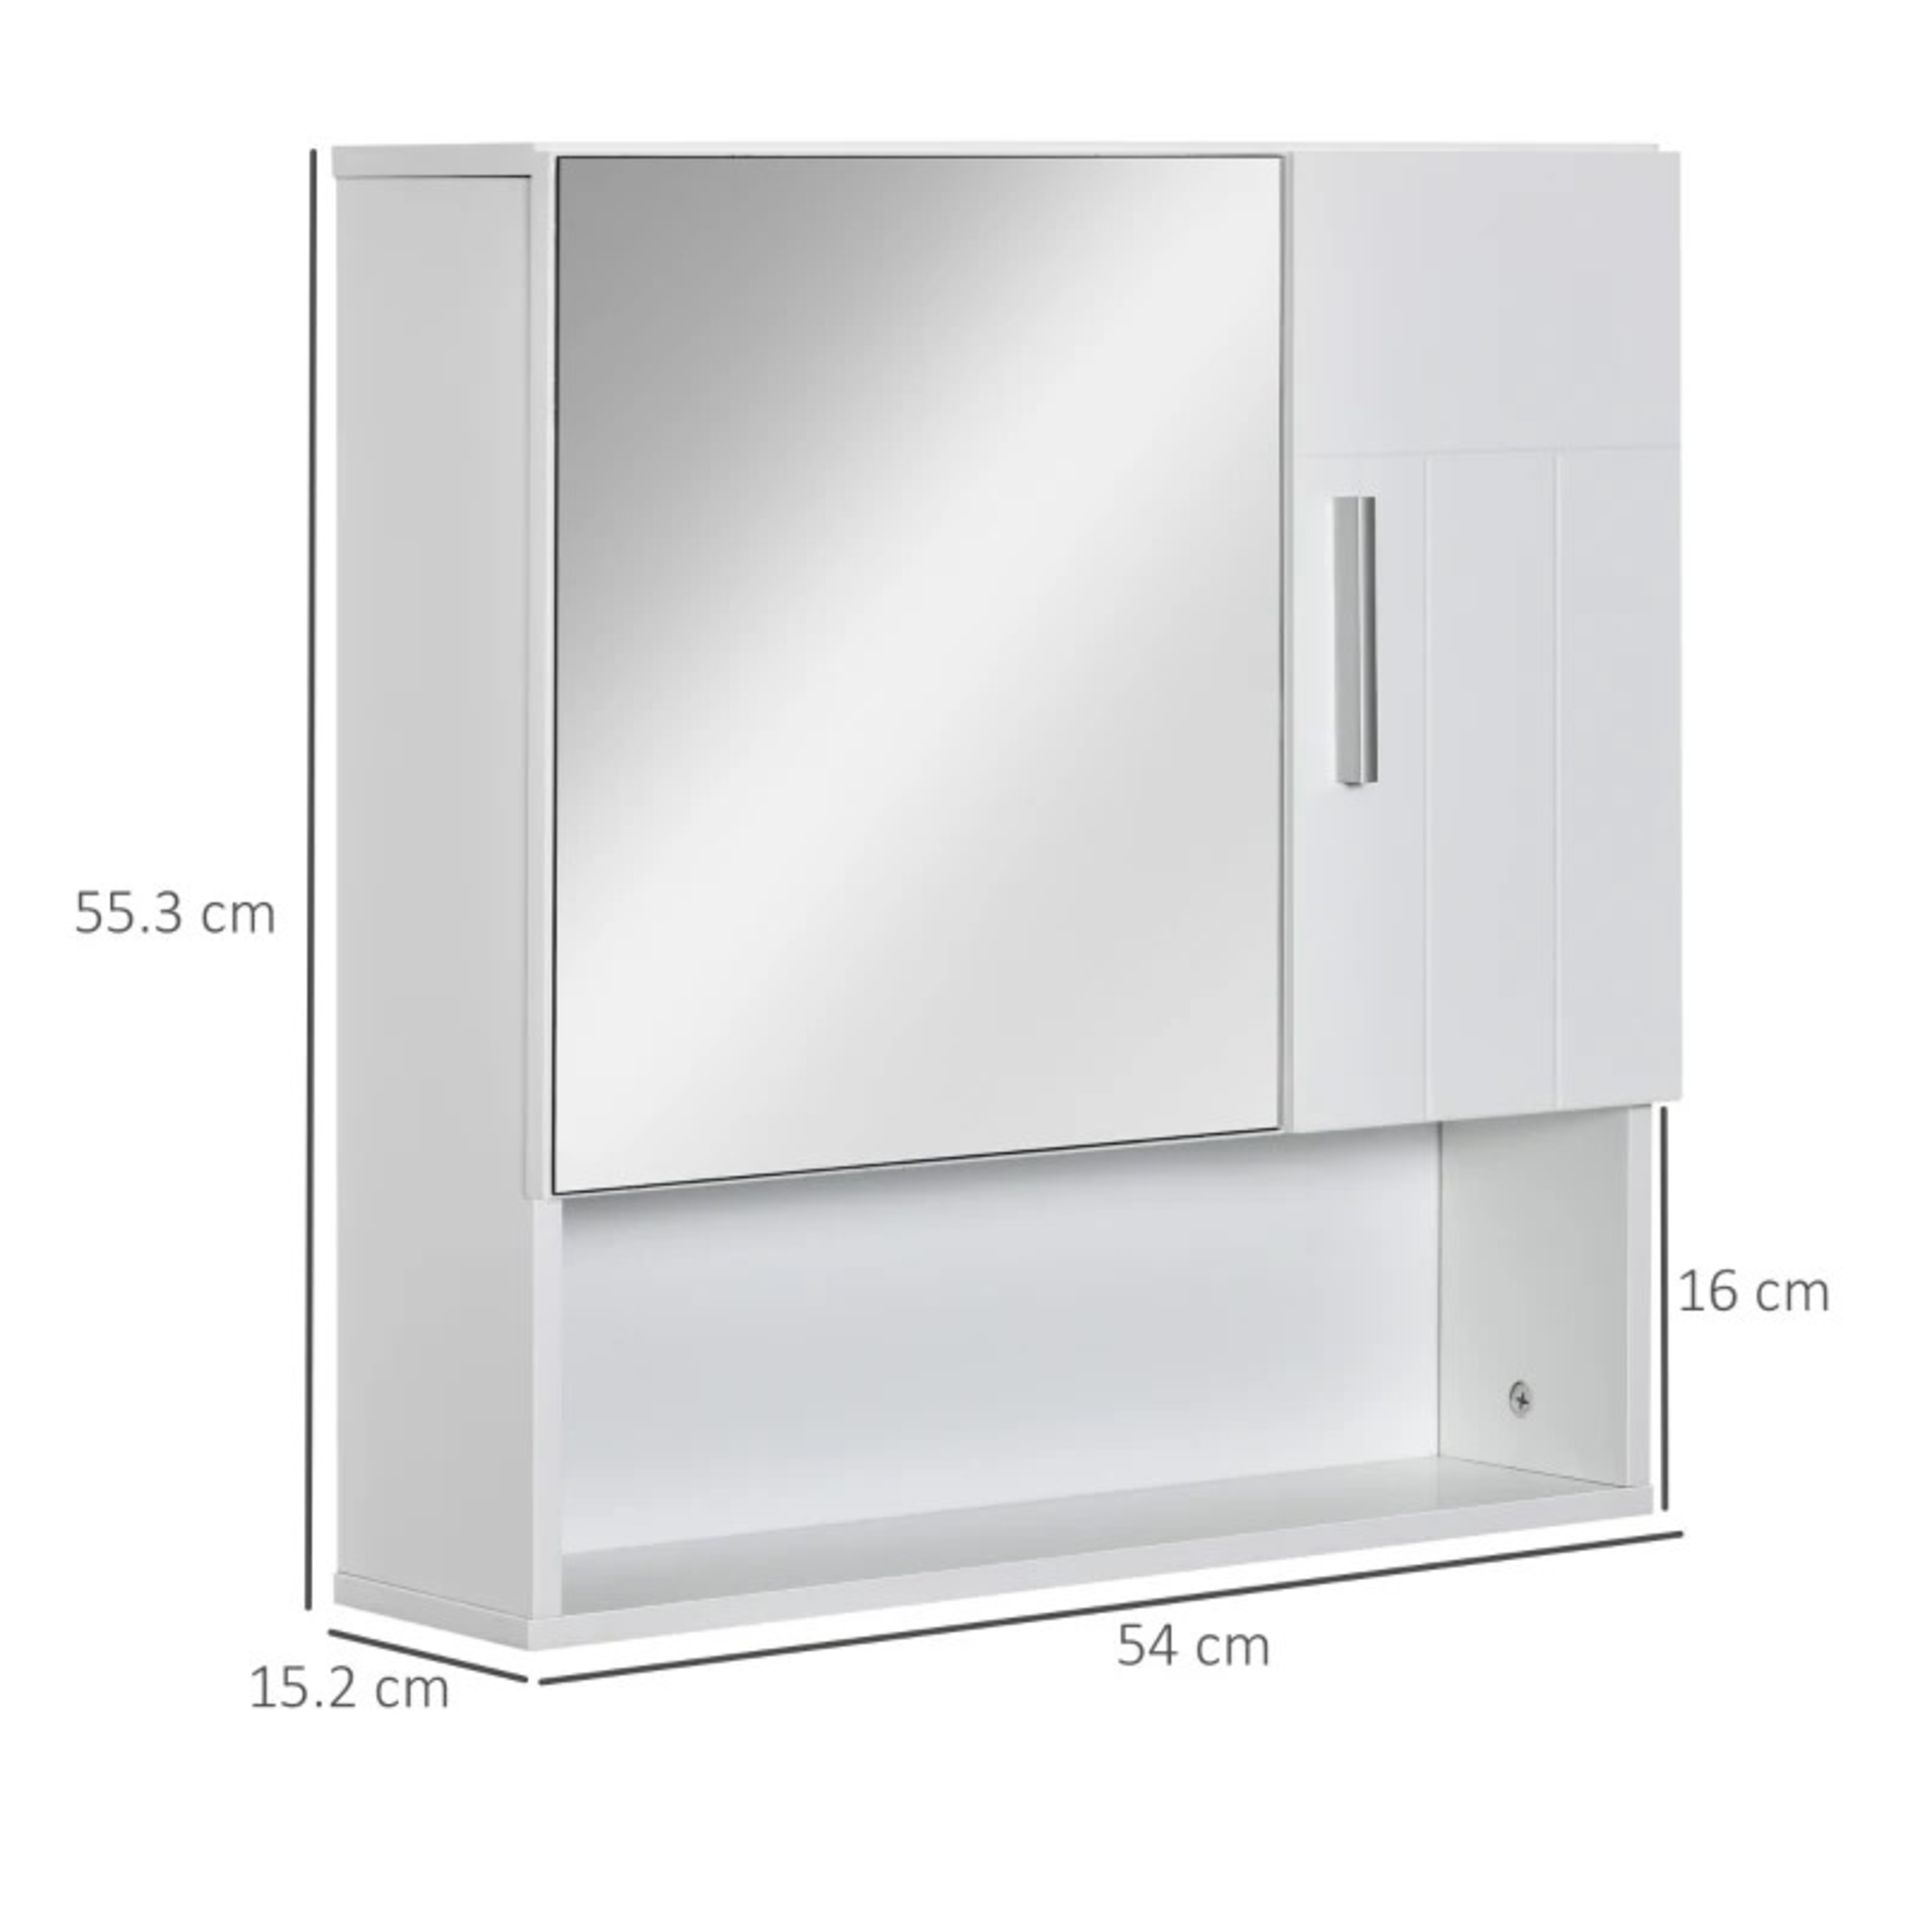 RRP £99.99 - kleankin Bathroom Mirror Cabinet, Wall Mounted Storage Cupboard Organizer with Double - Image 3 of 4